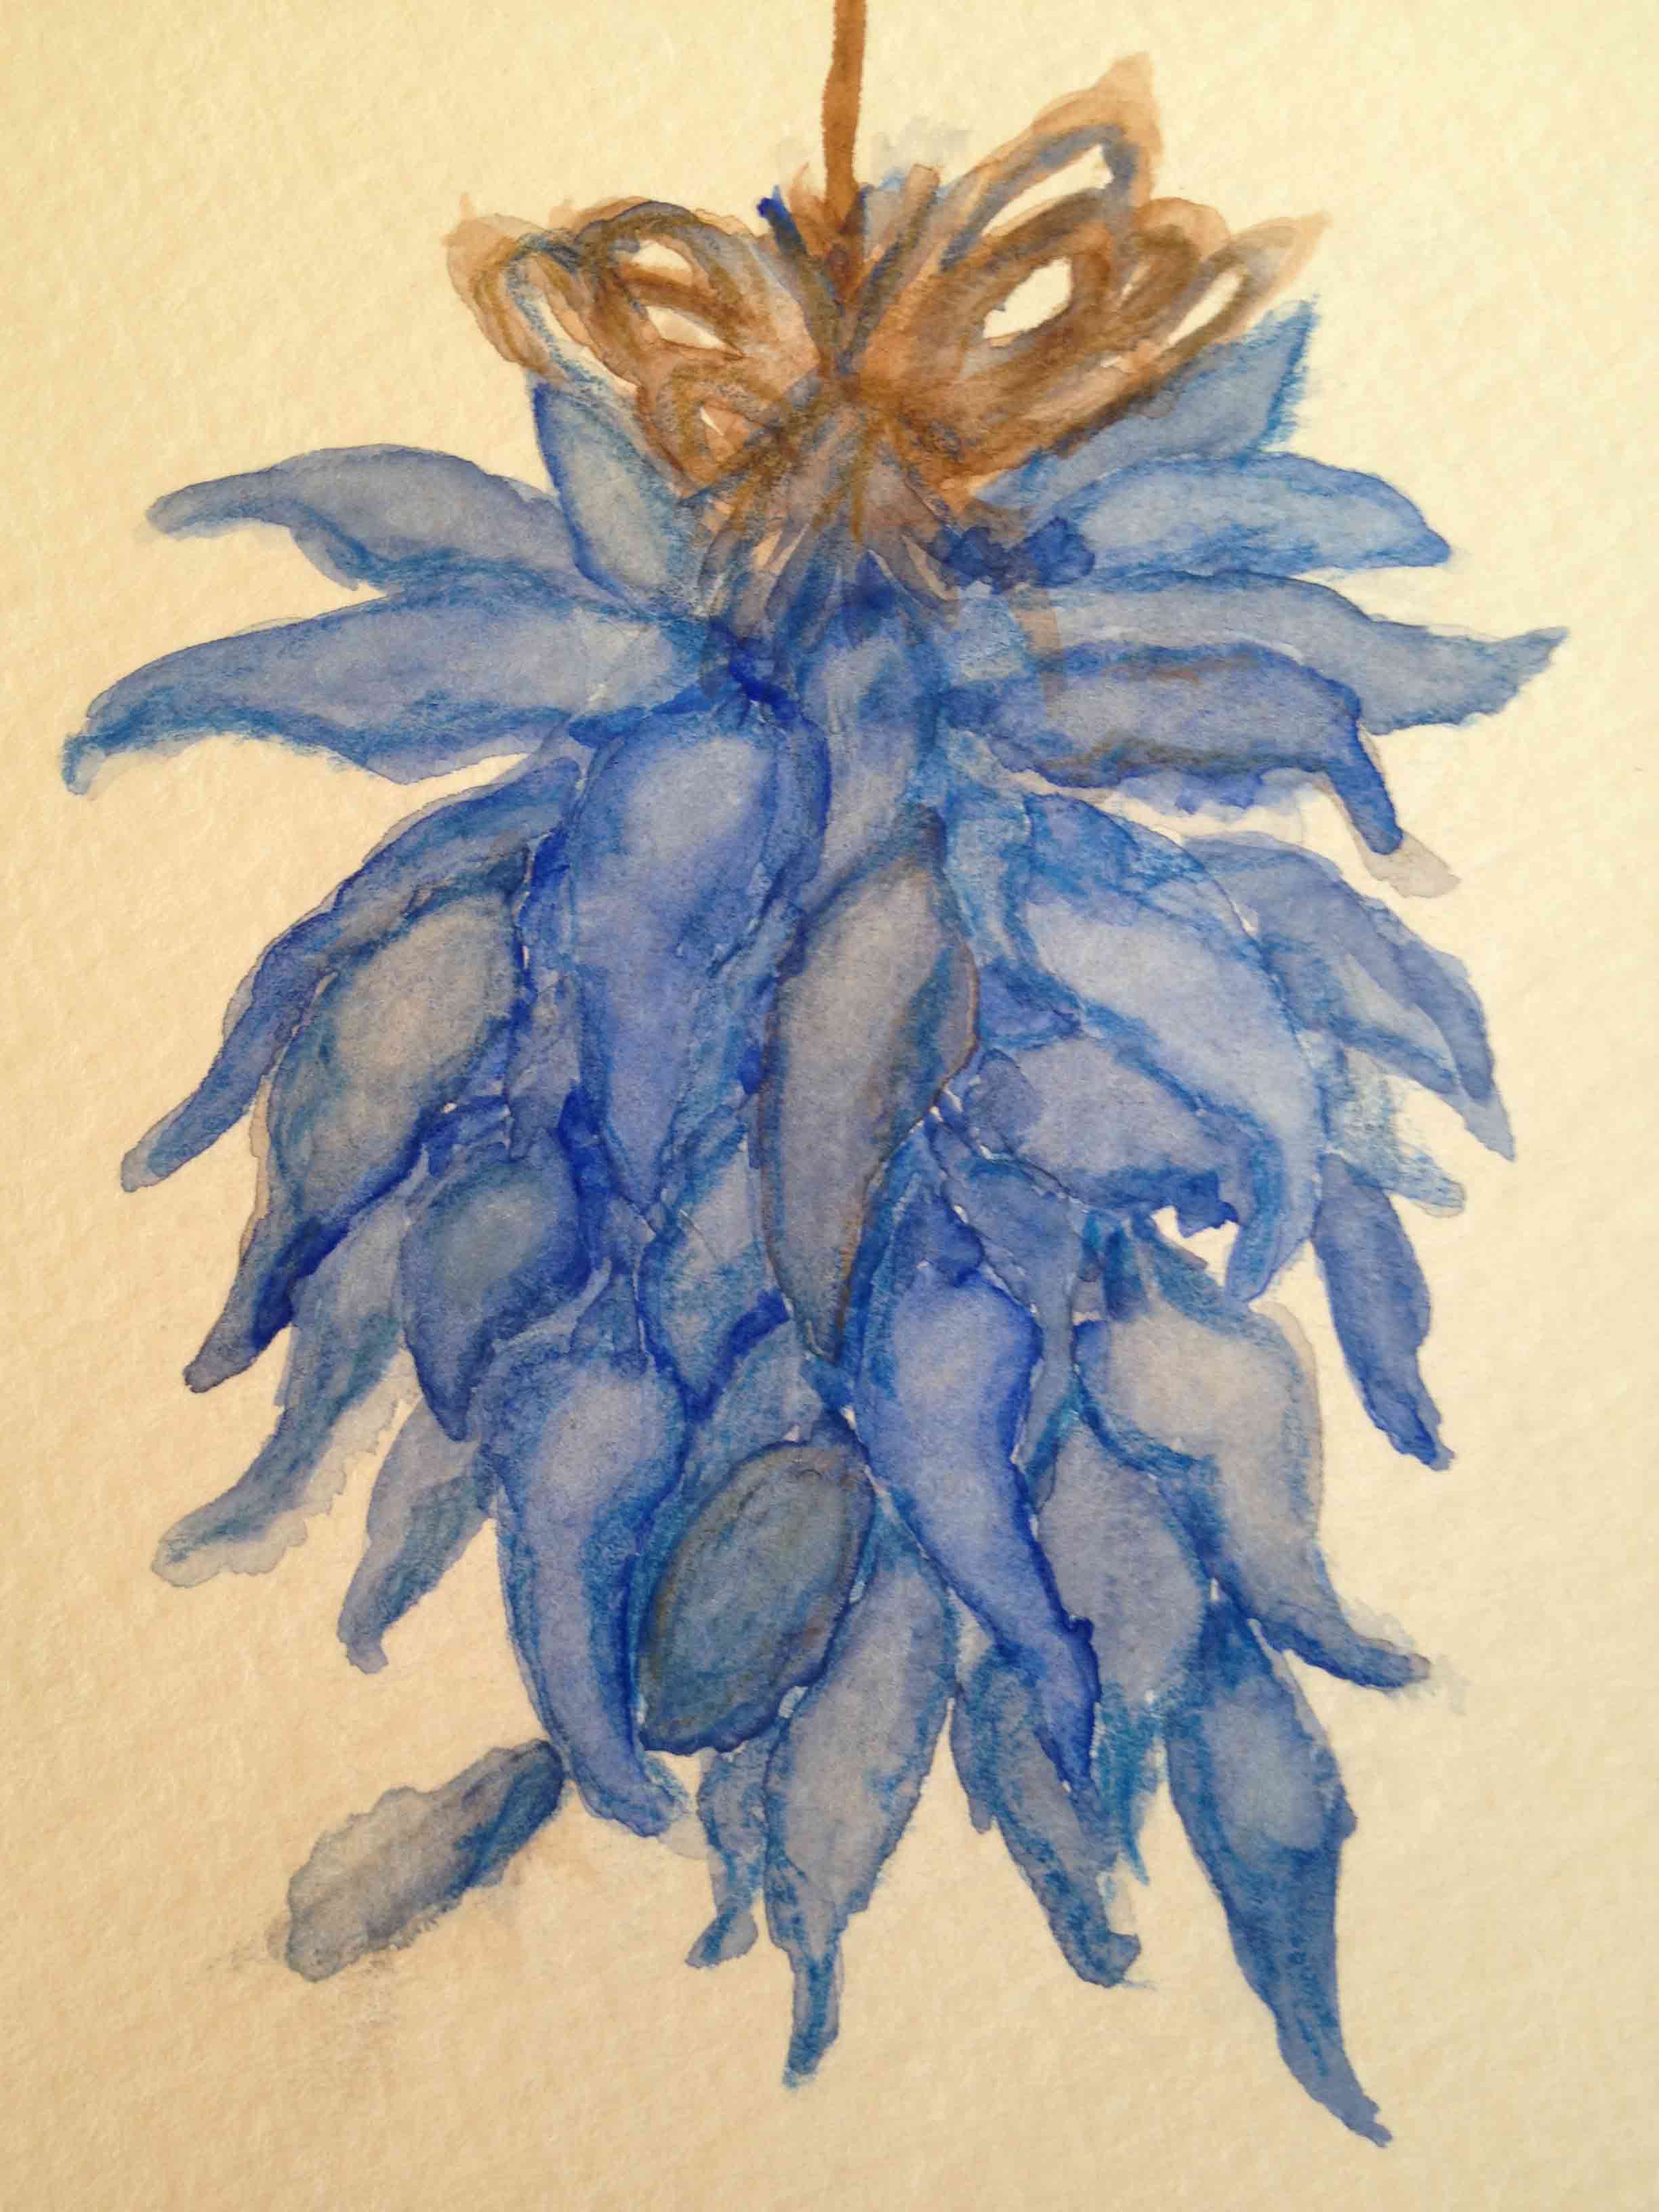 watercolor paining of blue chili peppers